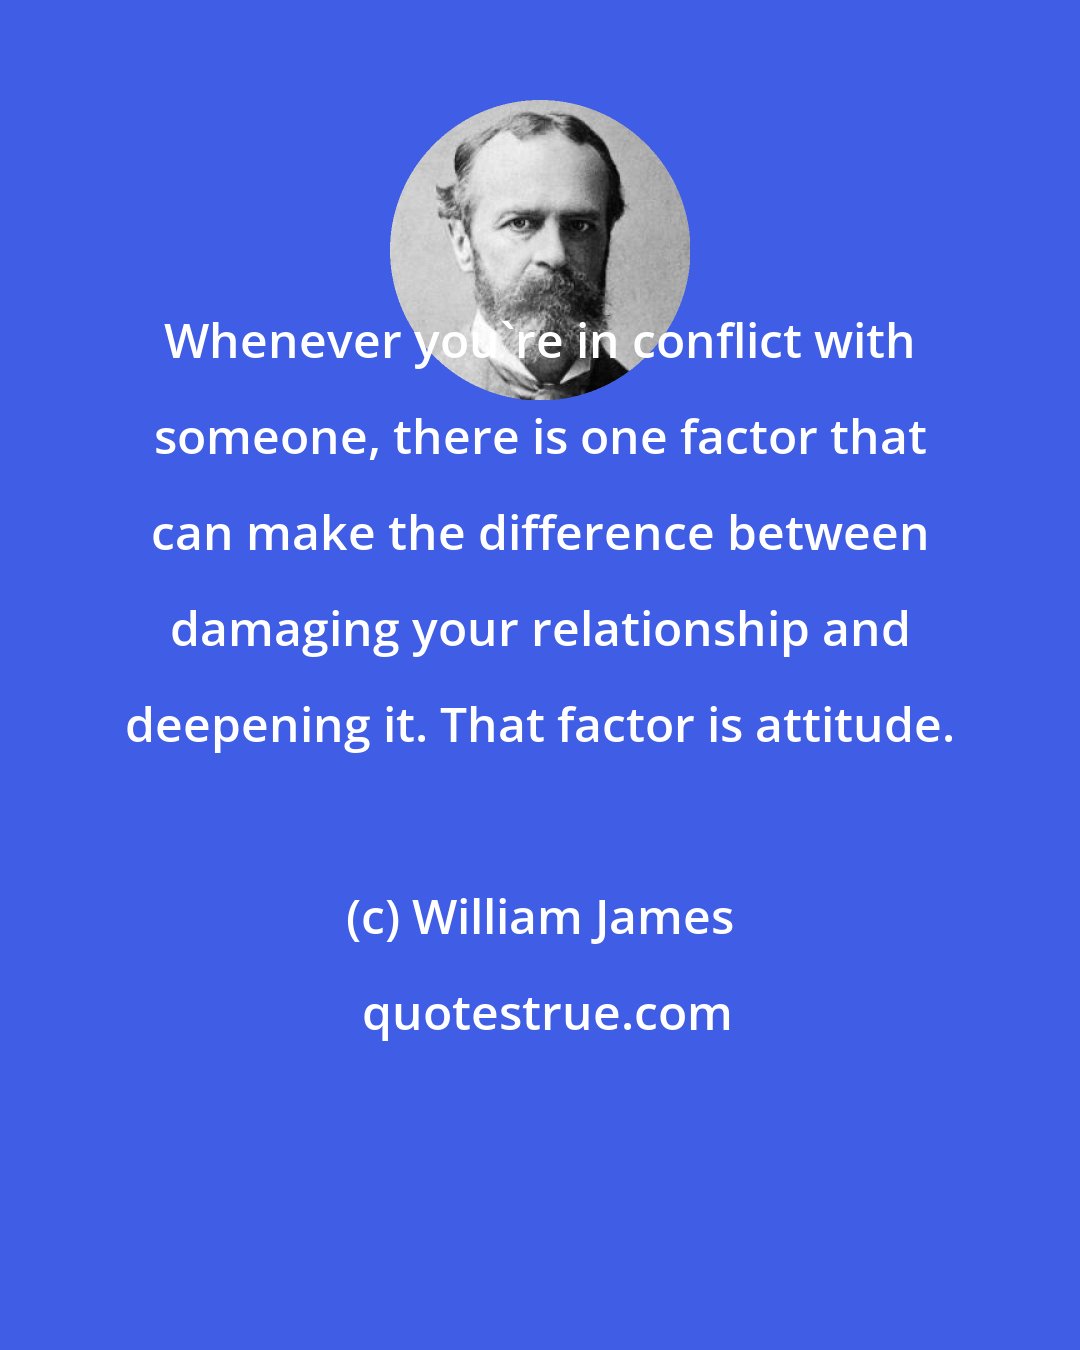 William James: Whenever you're in conflict with someone, there is one factor that can make the difference between damaging your relationship and deepening it. That factor is attitude.